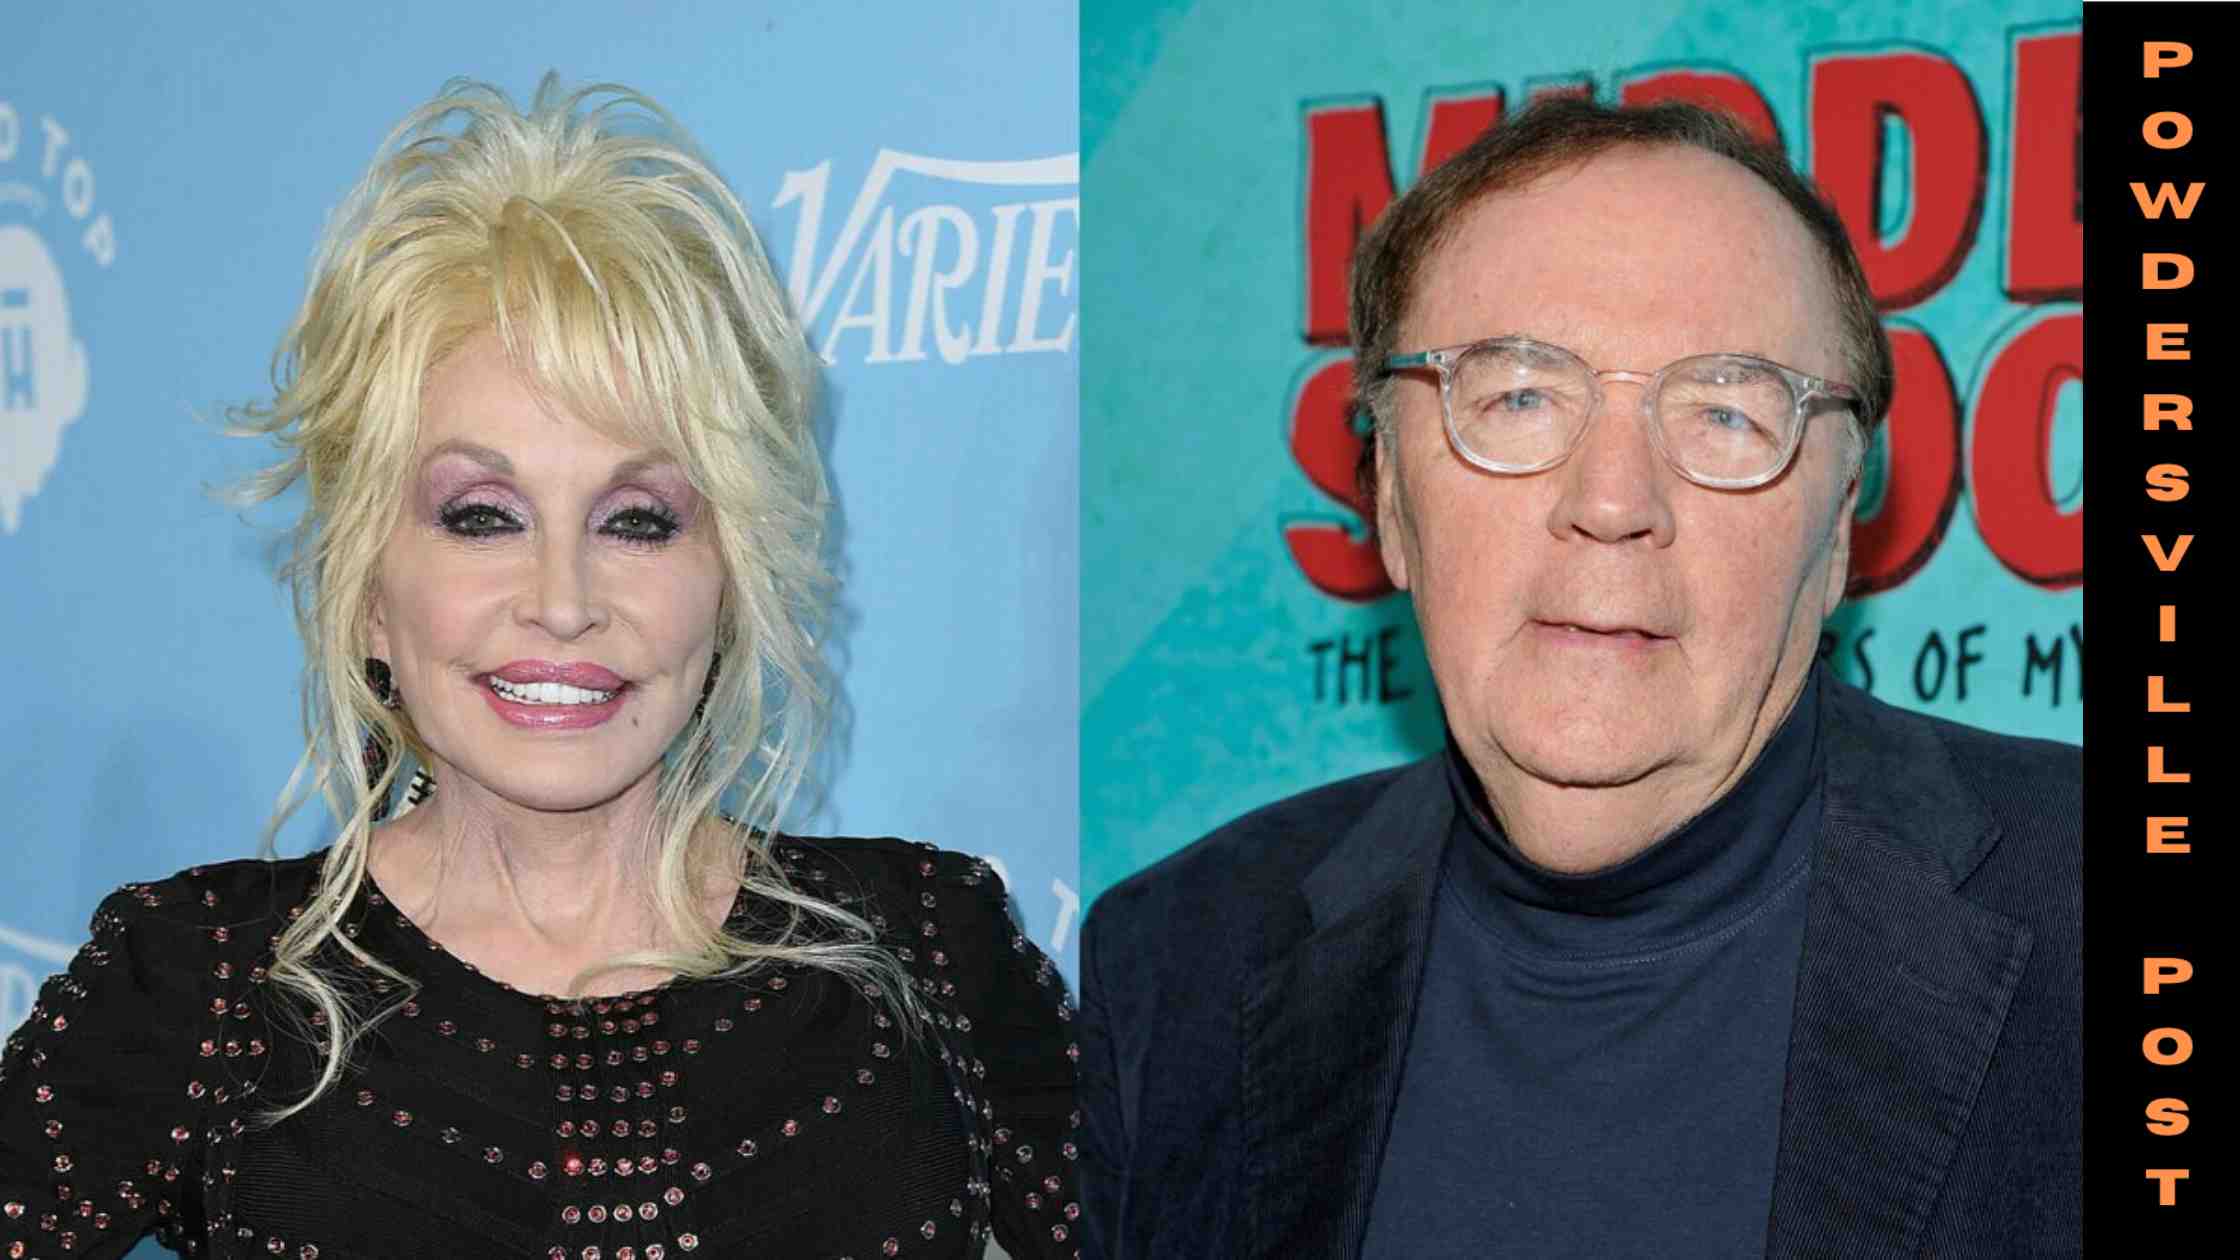 Famous Author James Patterson And Singer Dolly Parton Gearing Up For A New Novel